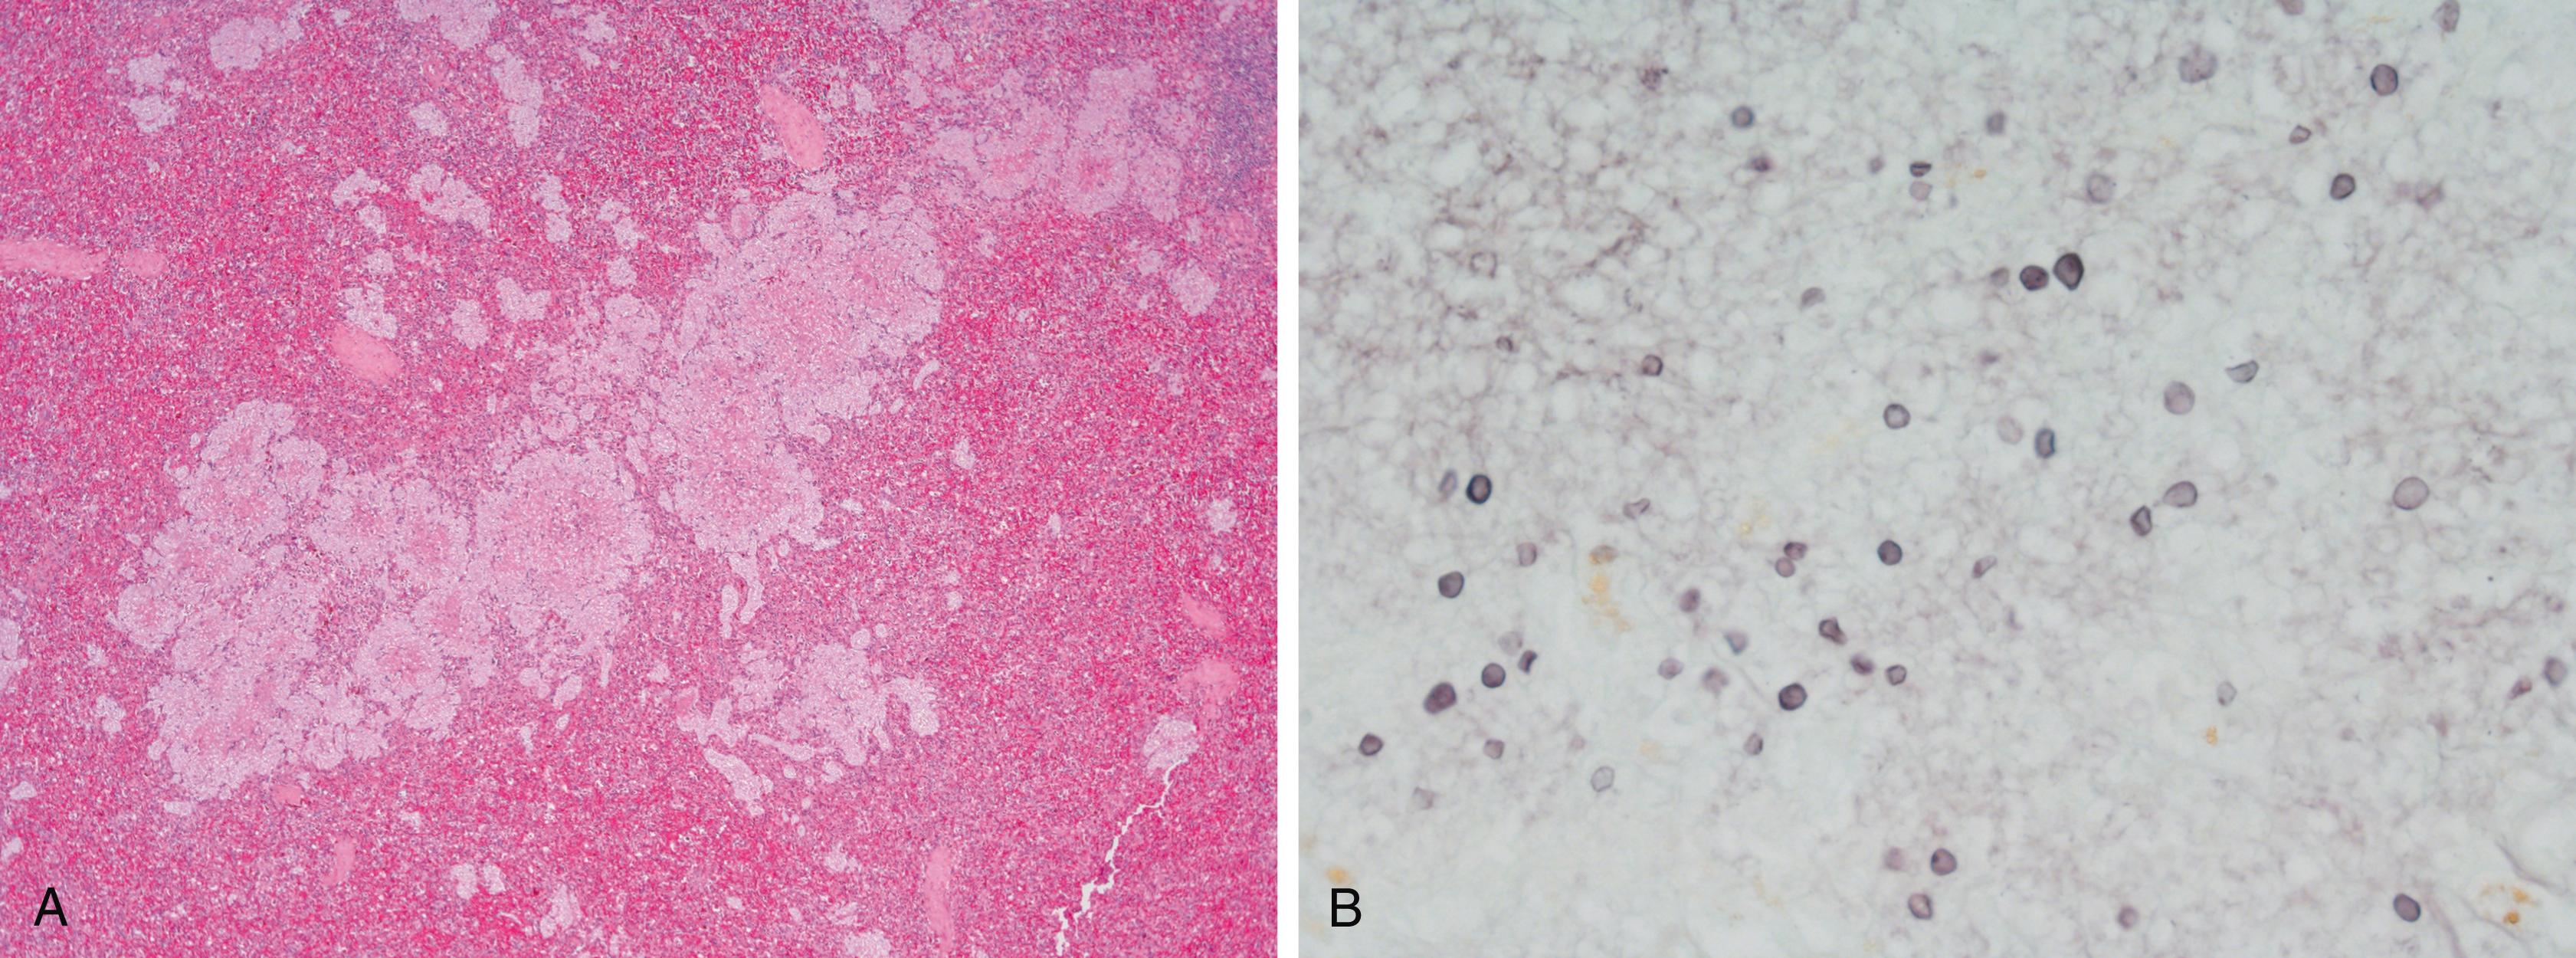 E-FIGURE 313-2, Histopathology of the spleen of a patient who died from disseminated Pneumocystis infection.